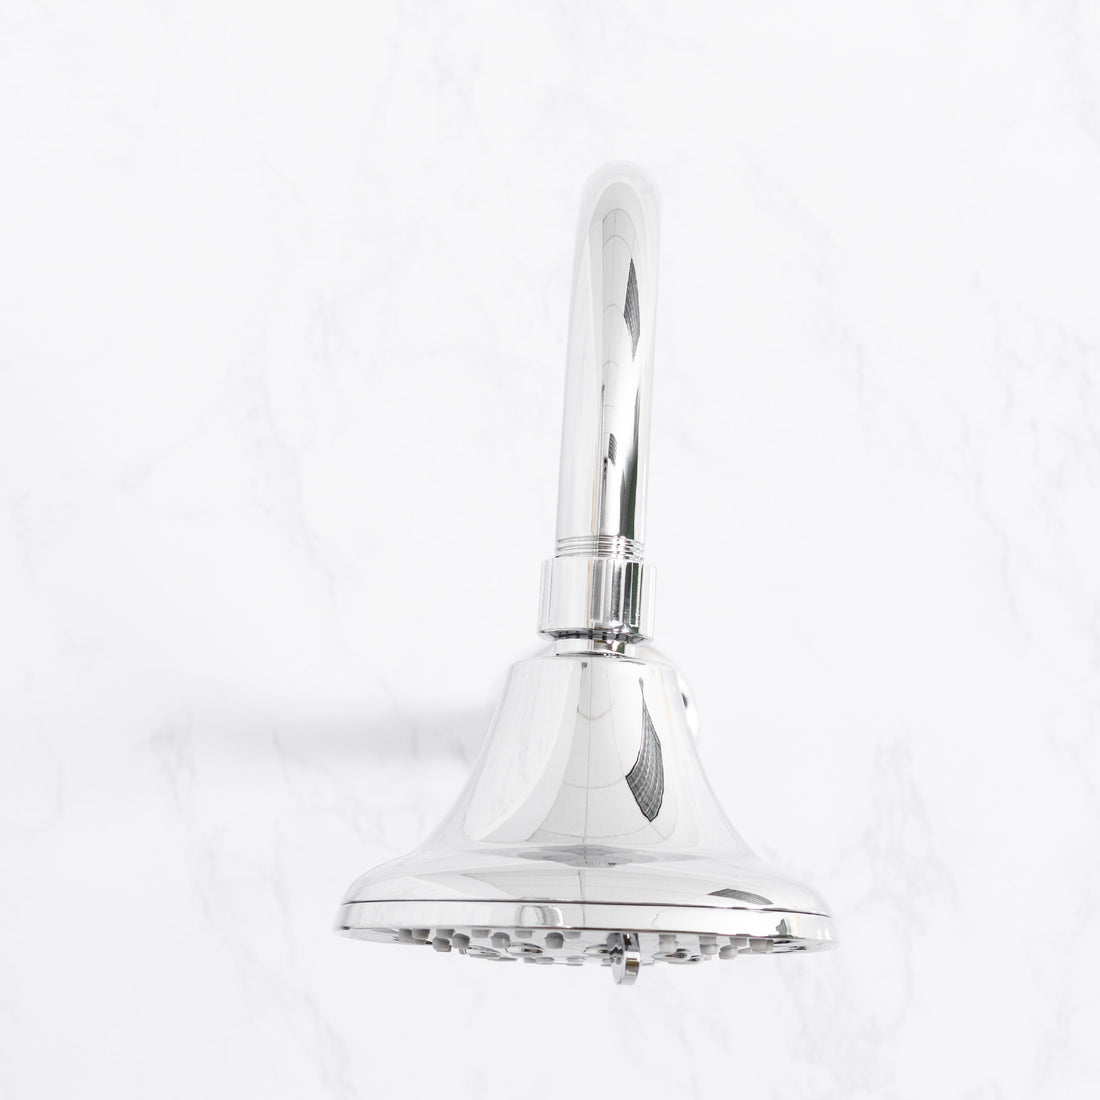 Trendy “waterfall” faucet cleaning tips? There's a buildup of